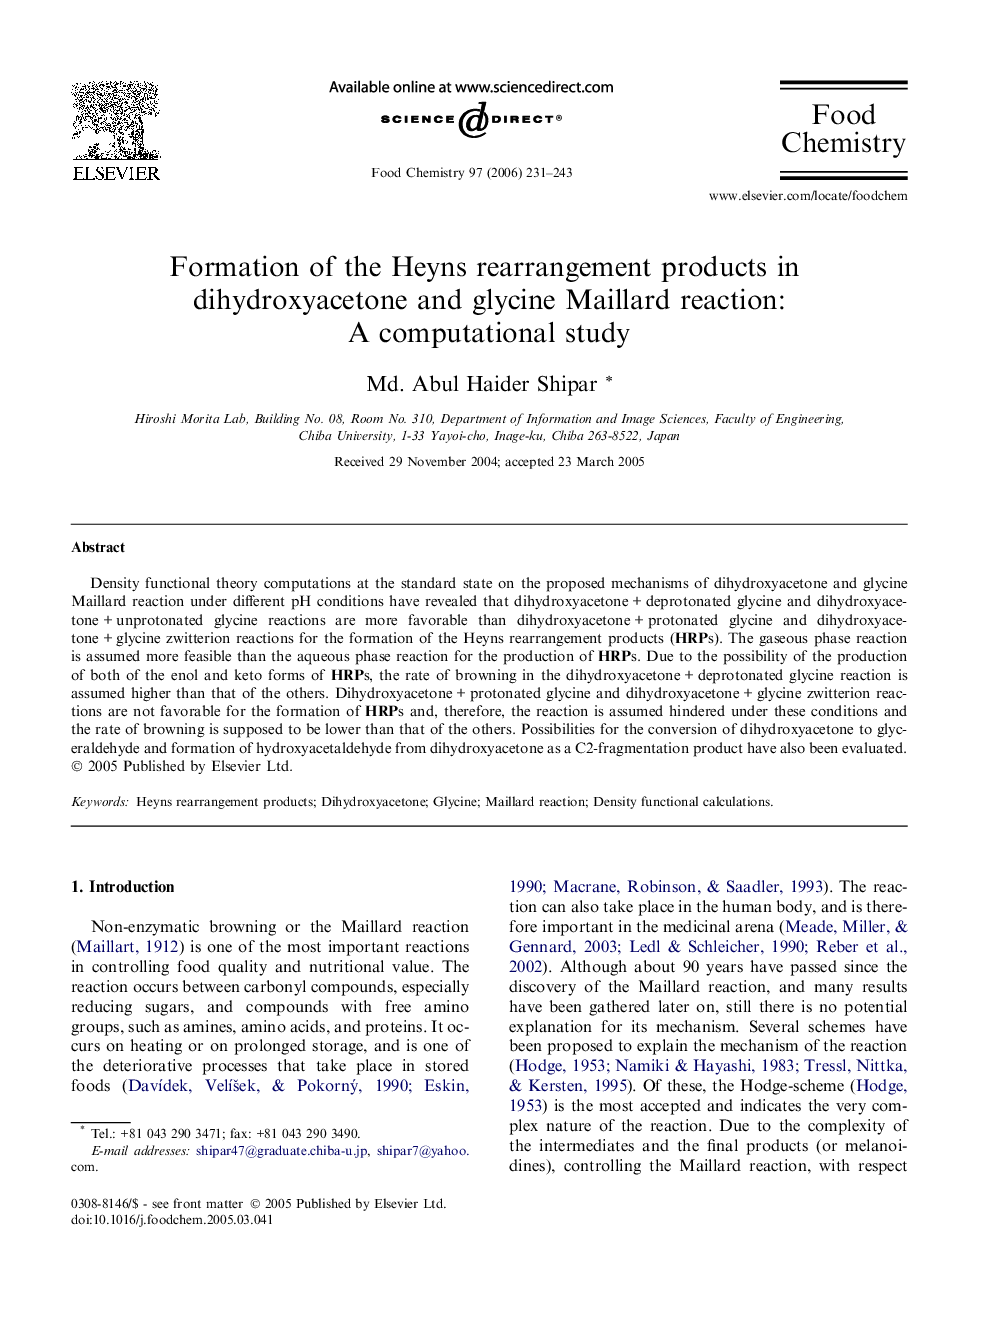 Formation of the Heyns rearrangement products in dihydroxyacetone and glycine Maillard reaction: A computational study